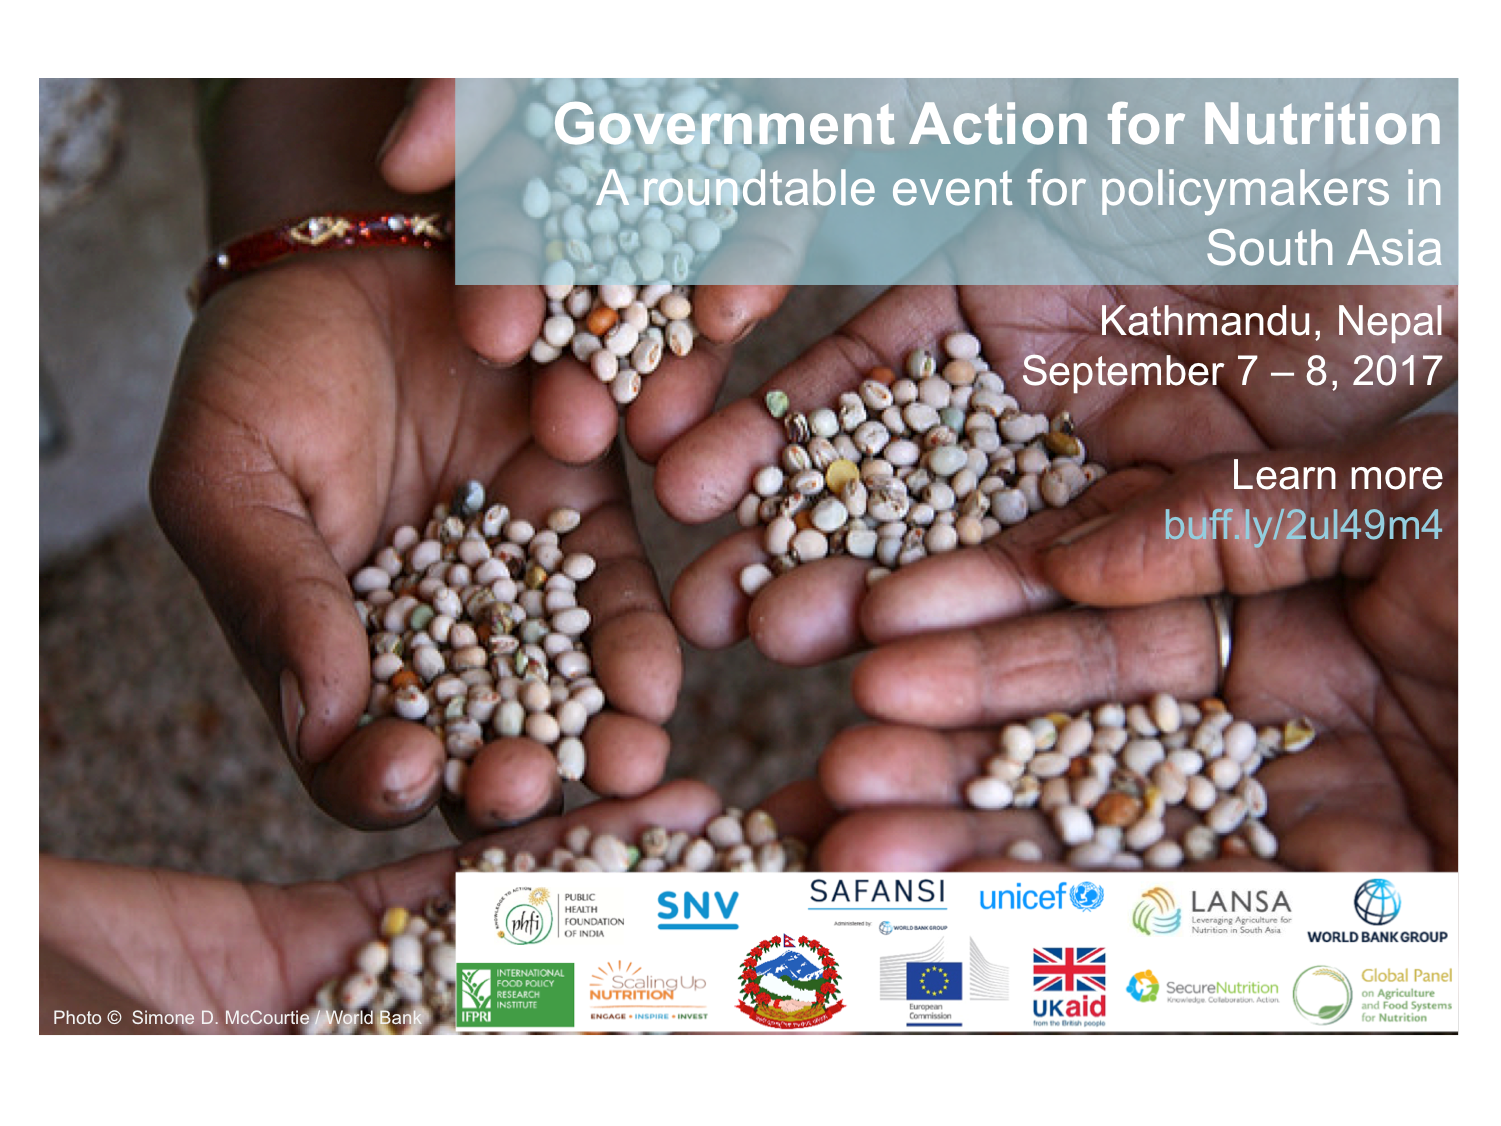 SAFANSI Roundtable: A Focus on Government Action for Nutrition in South Asia